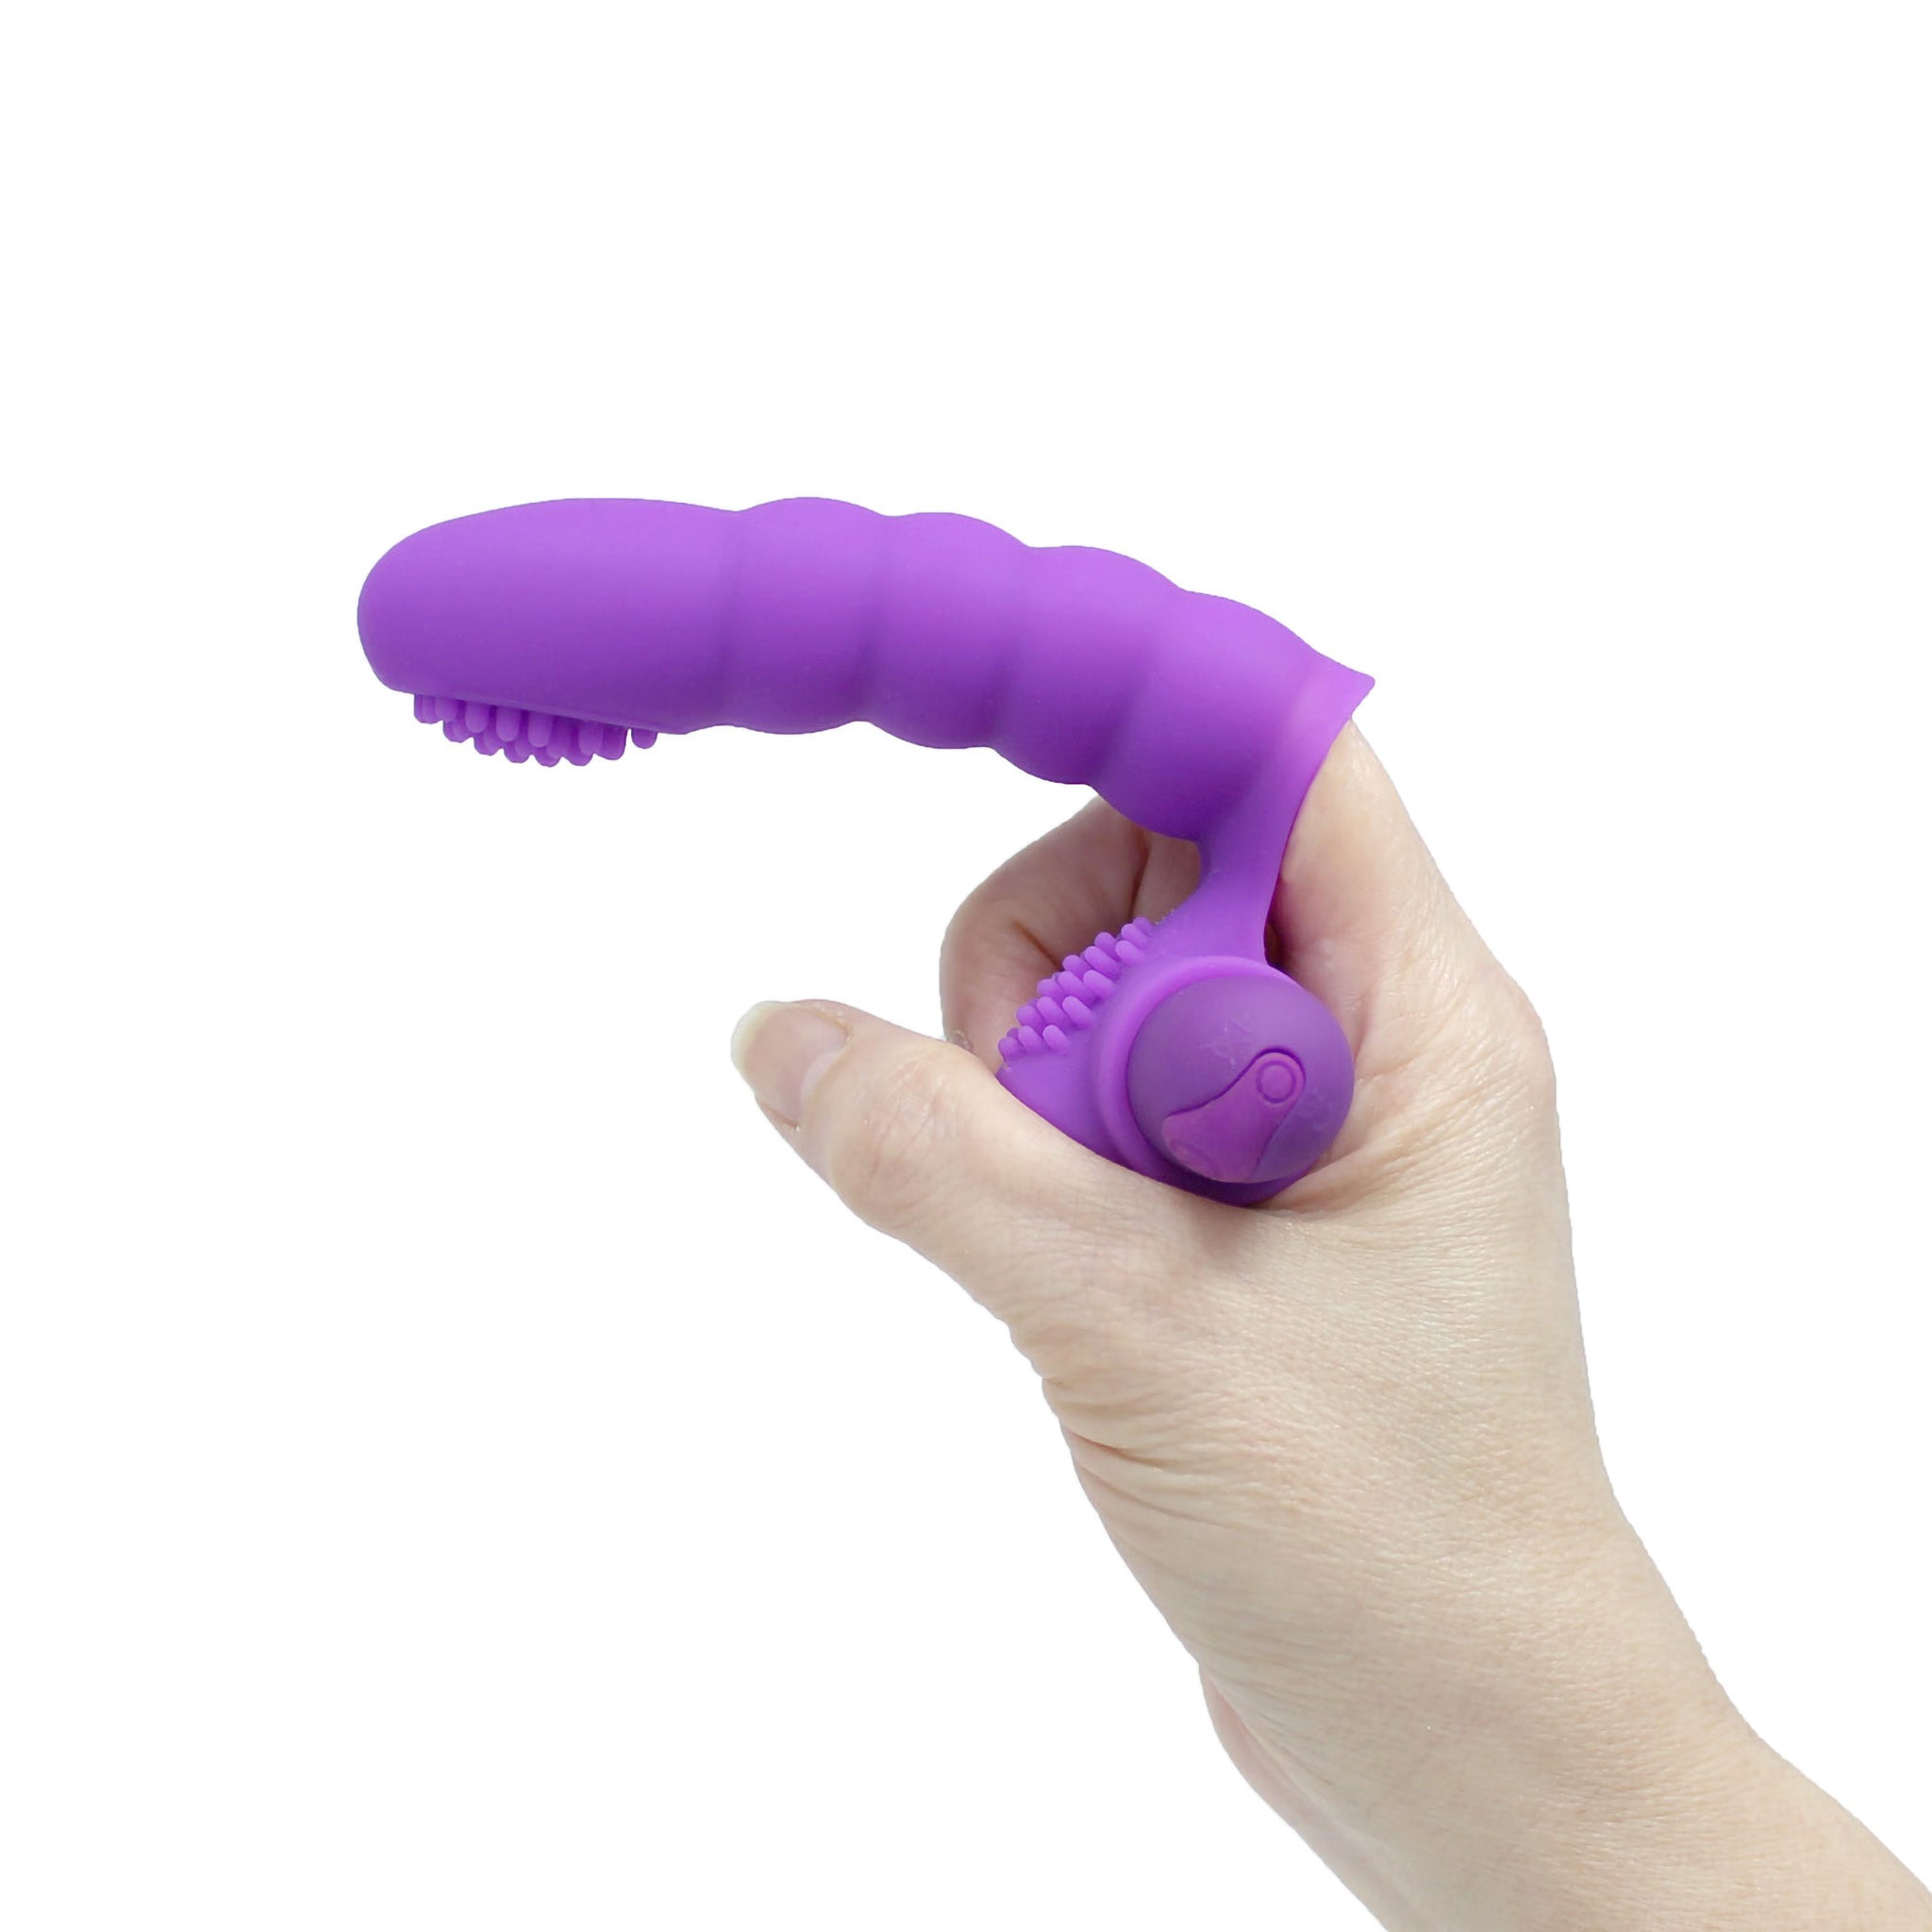 Silicone Clit G-spot Touch Finger Vibe Massager Orgasm Vibrator Sextoy for Women